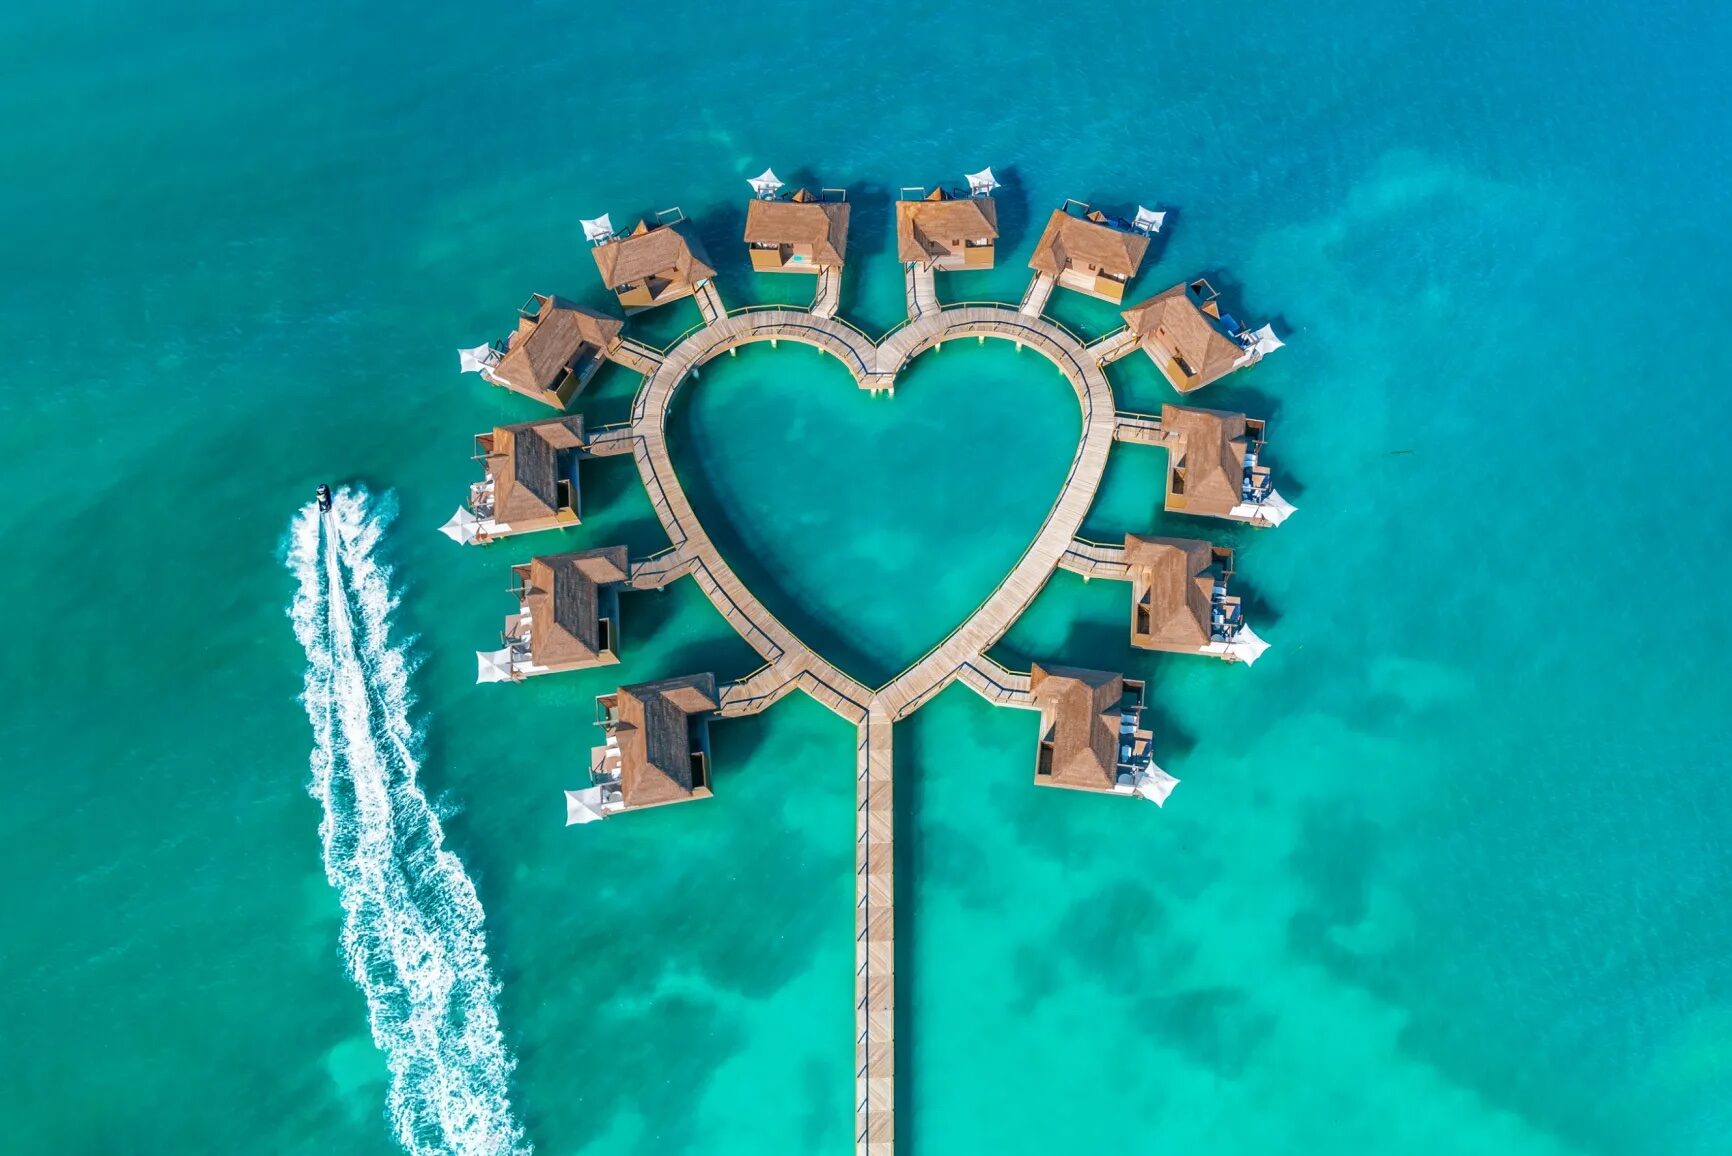 Aerial view of the overwater bungalows and villas gathered around a heart-shaped boardwalk at Sandals South Coast in Jamaica